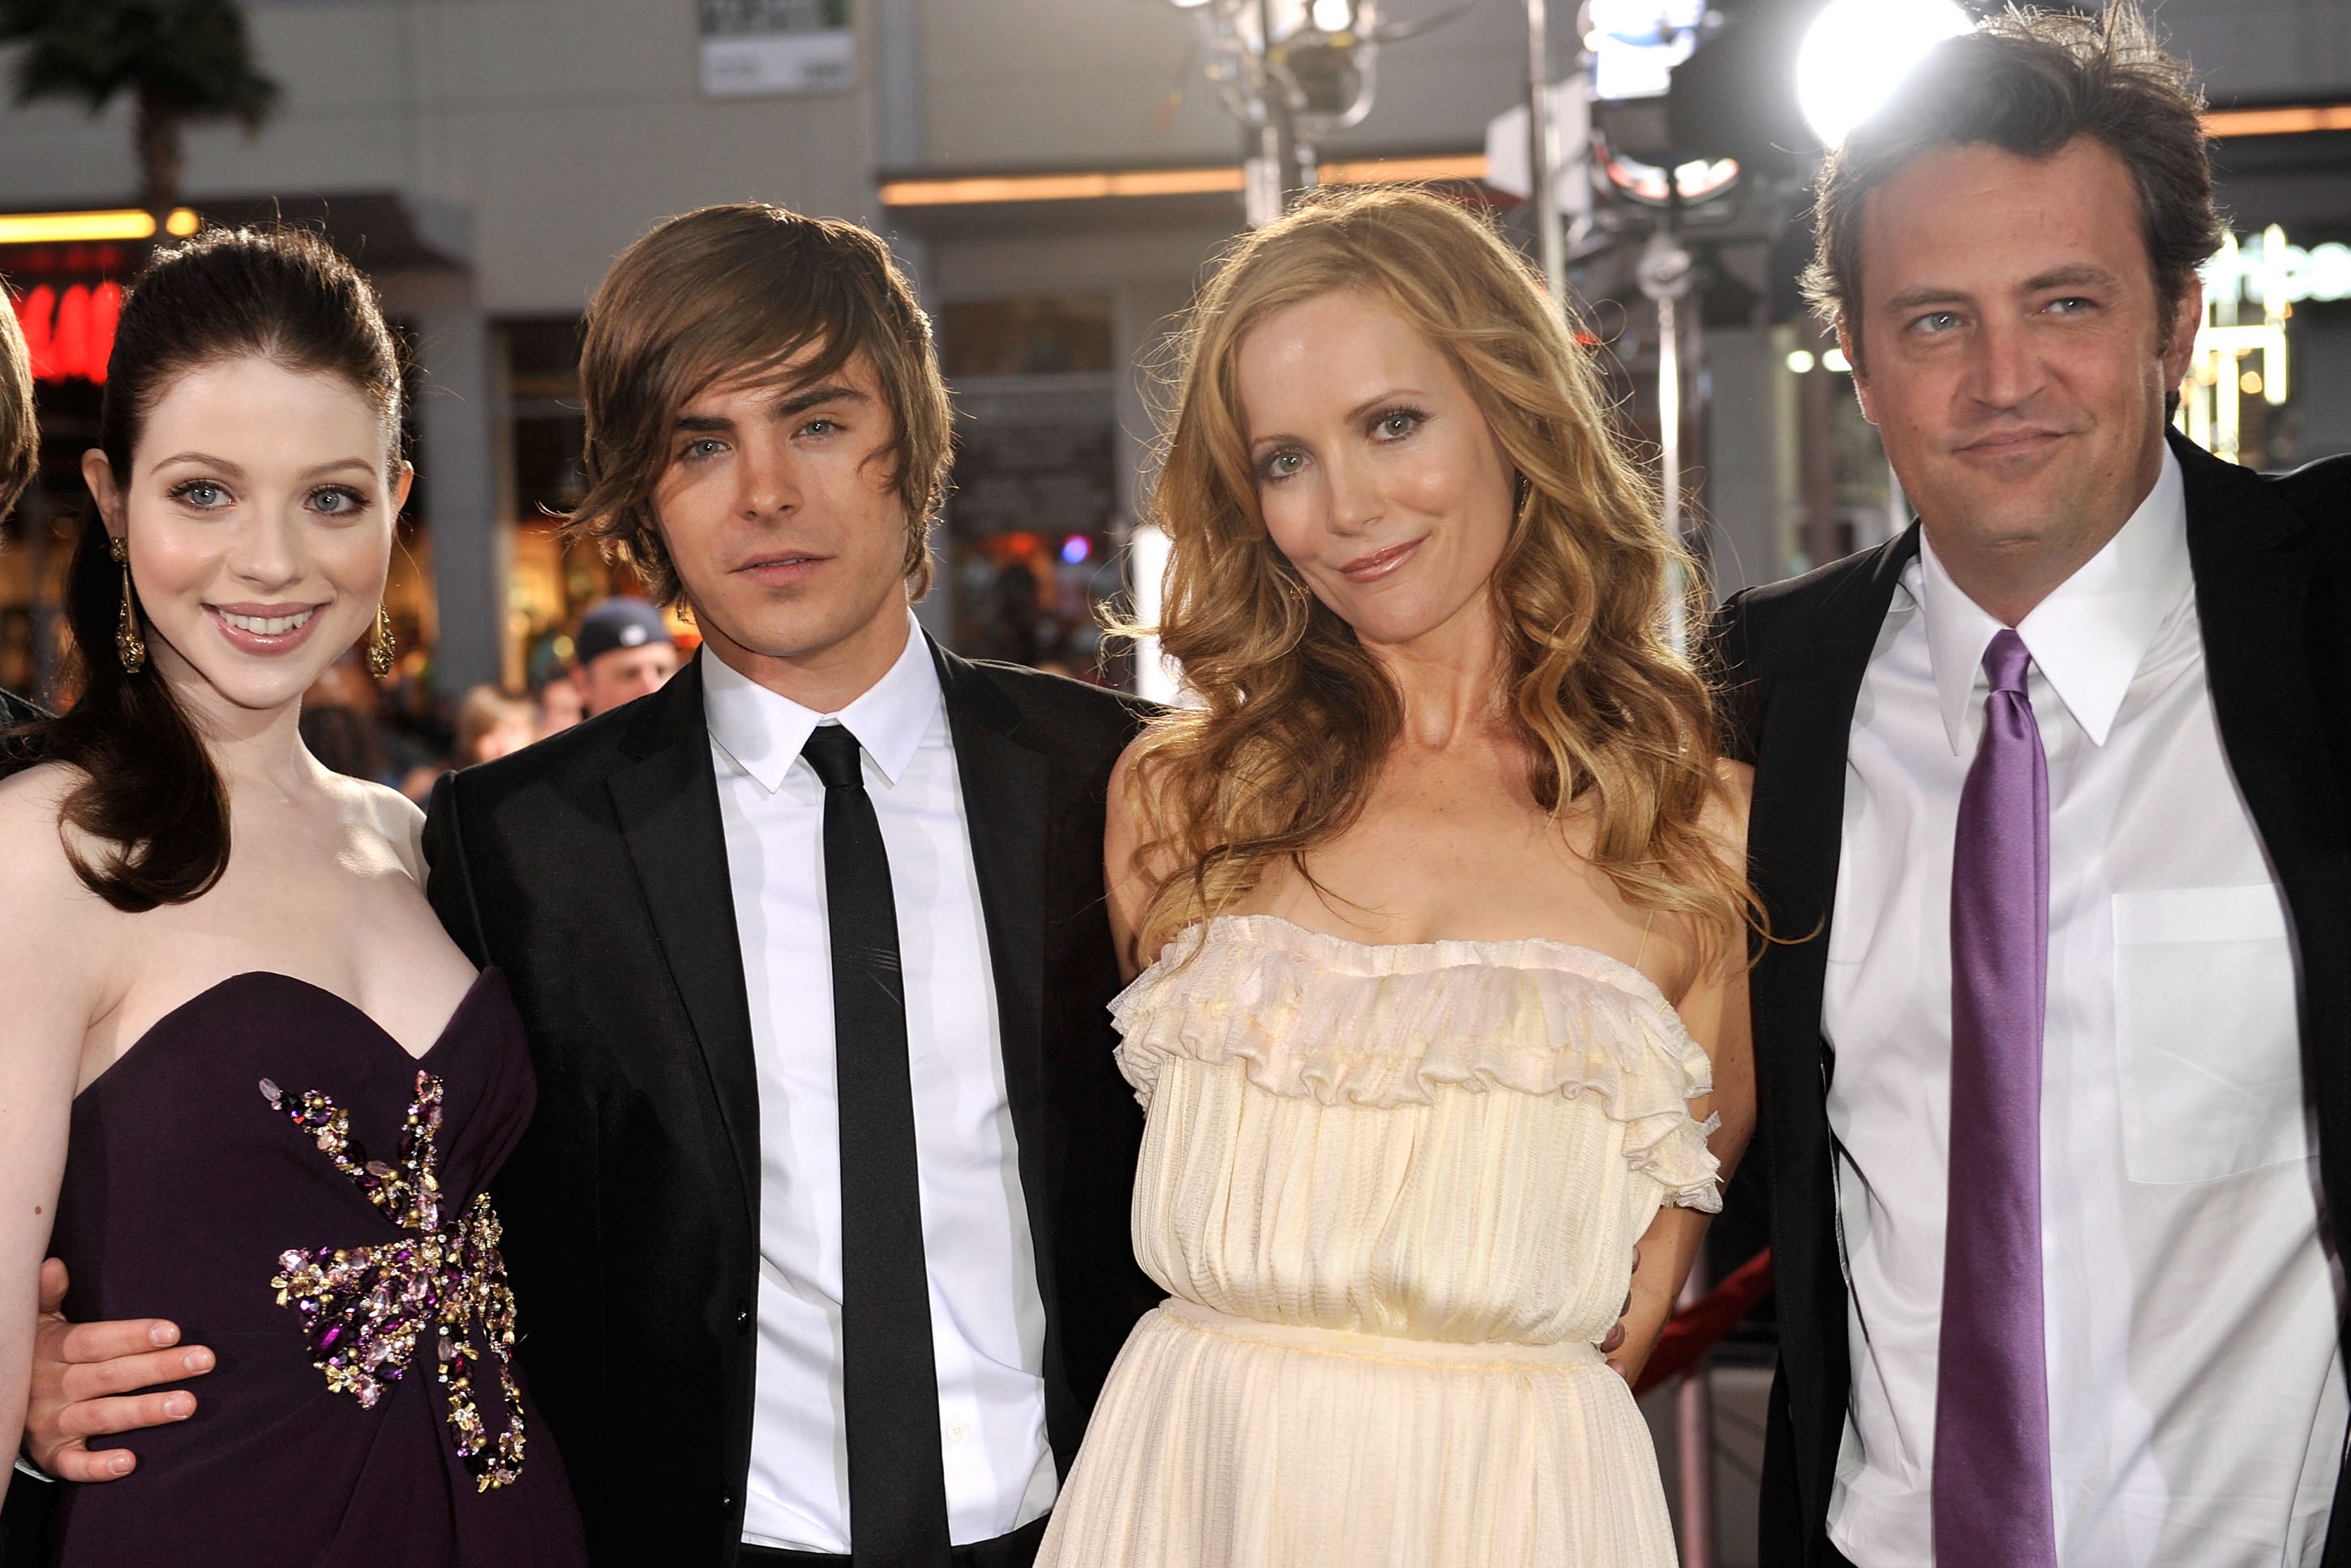 Michelle Trachtenberg, Zac Efron, Leslie Mann and Matthew Perry at the ‘17 Again’ premiere